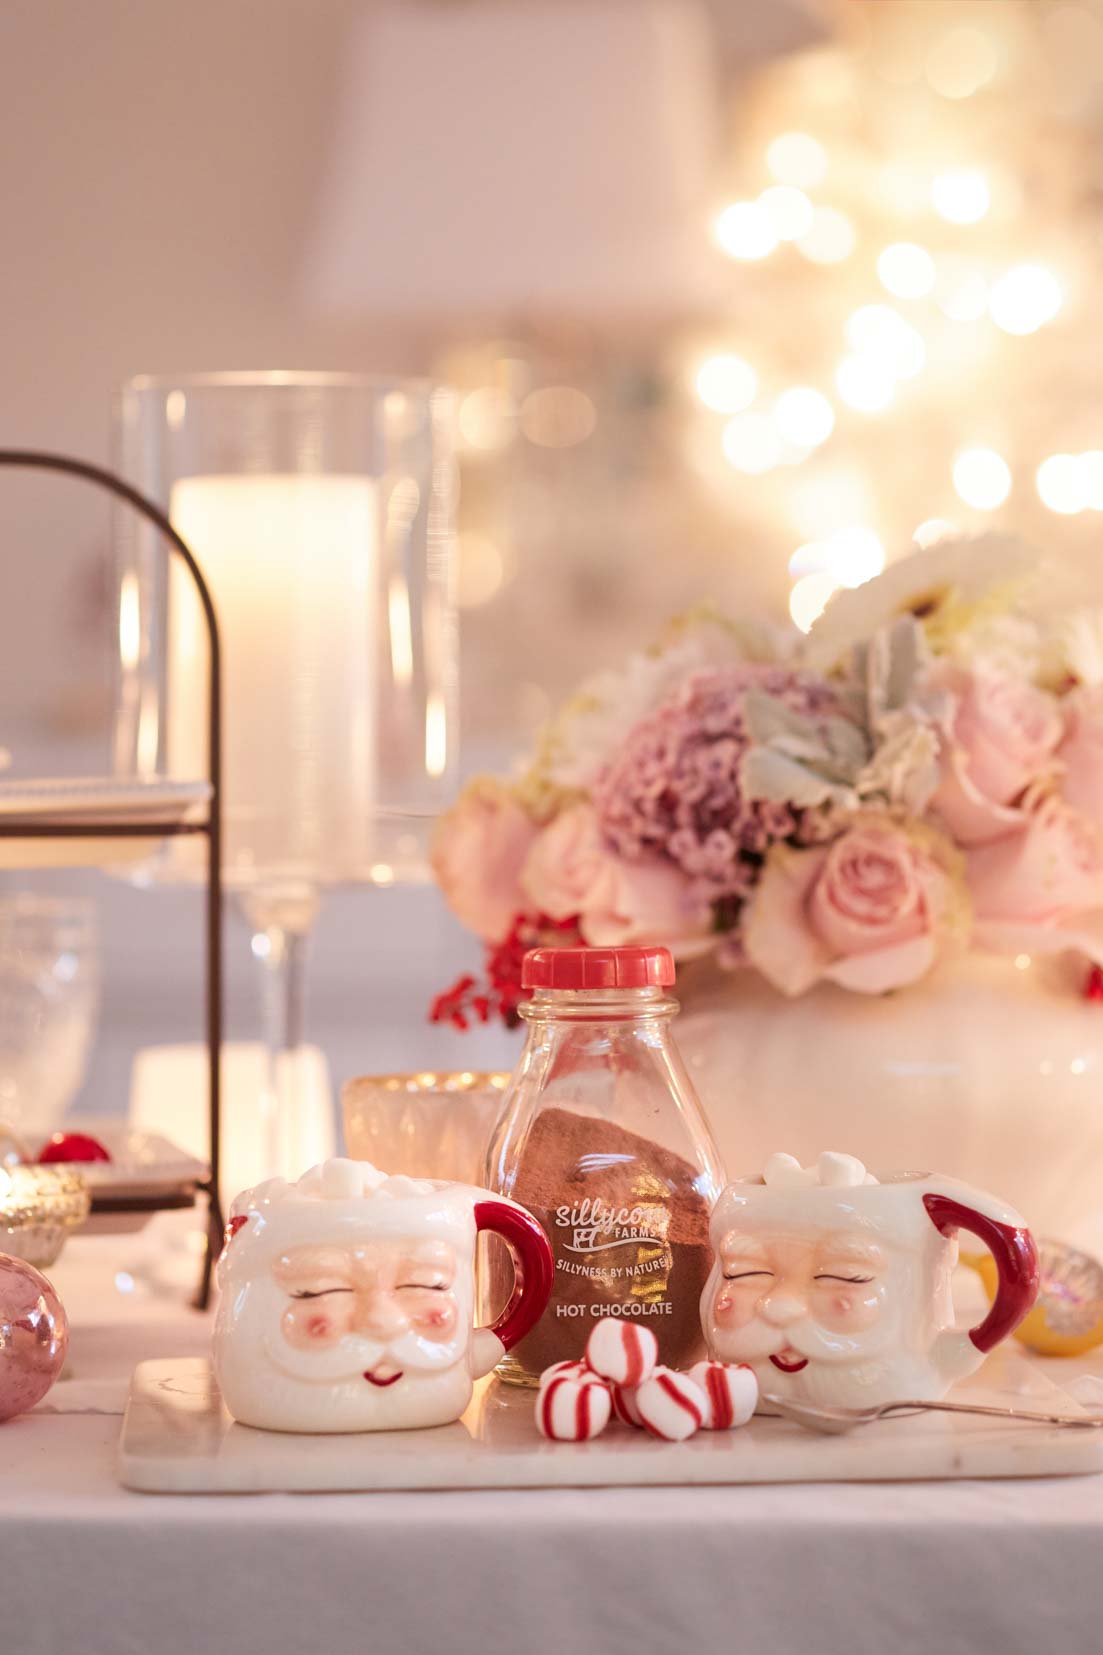 Do you need some Holiday Home decor ideas? This pretty Christmas night tour is packed with ideas for your Christmas dining room to outdoor entertaining. Also, find out how to create the cutest mason jar hot cocoa gift and tags! #christmasdecor #decoratingfortheholidays #holidaydecor